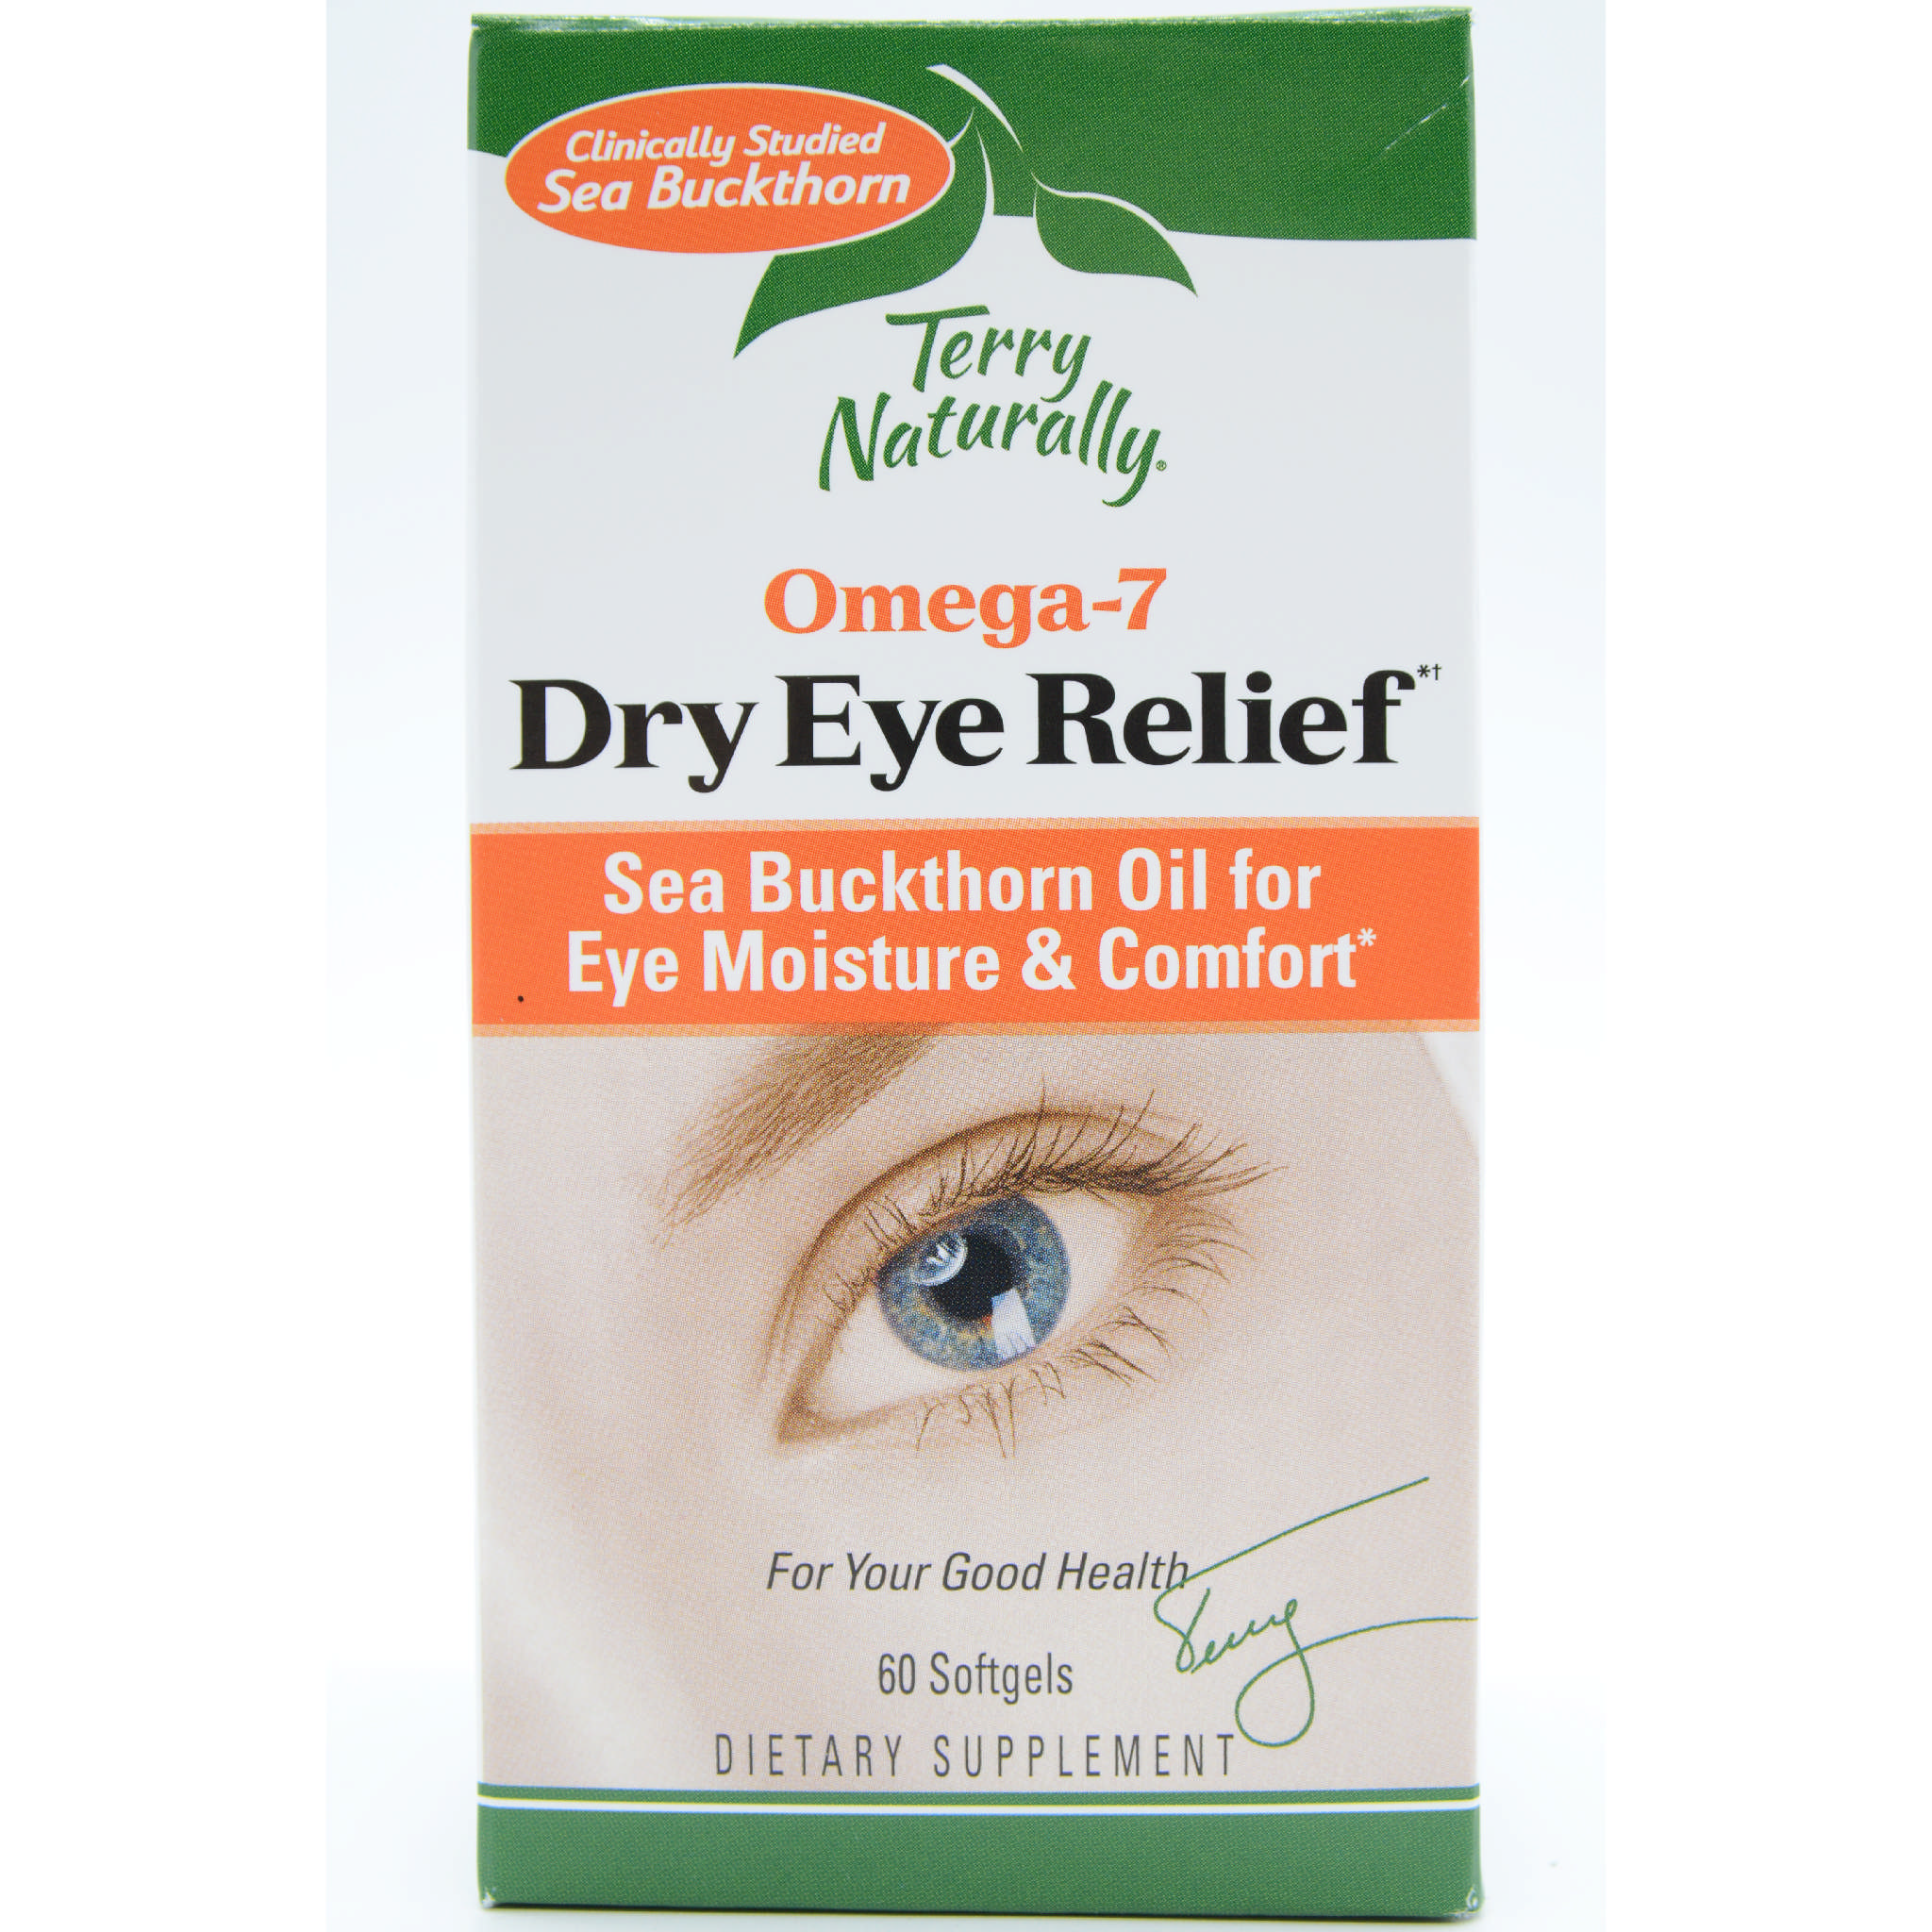 Terry Naturally - Omega 7 Dry Eye Relief